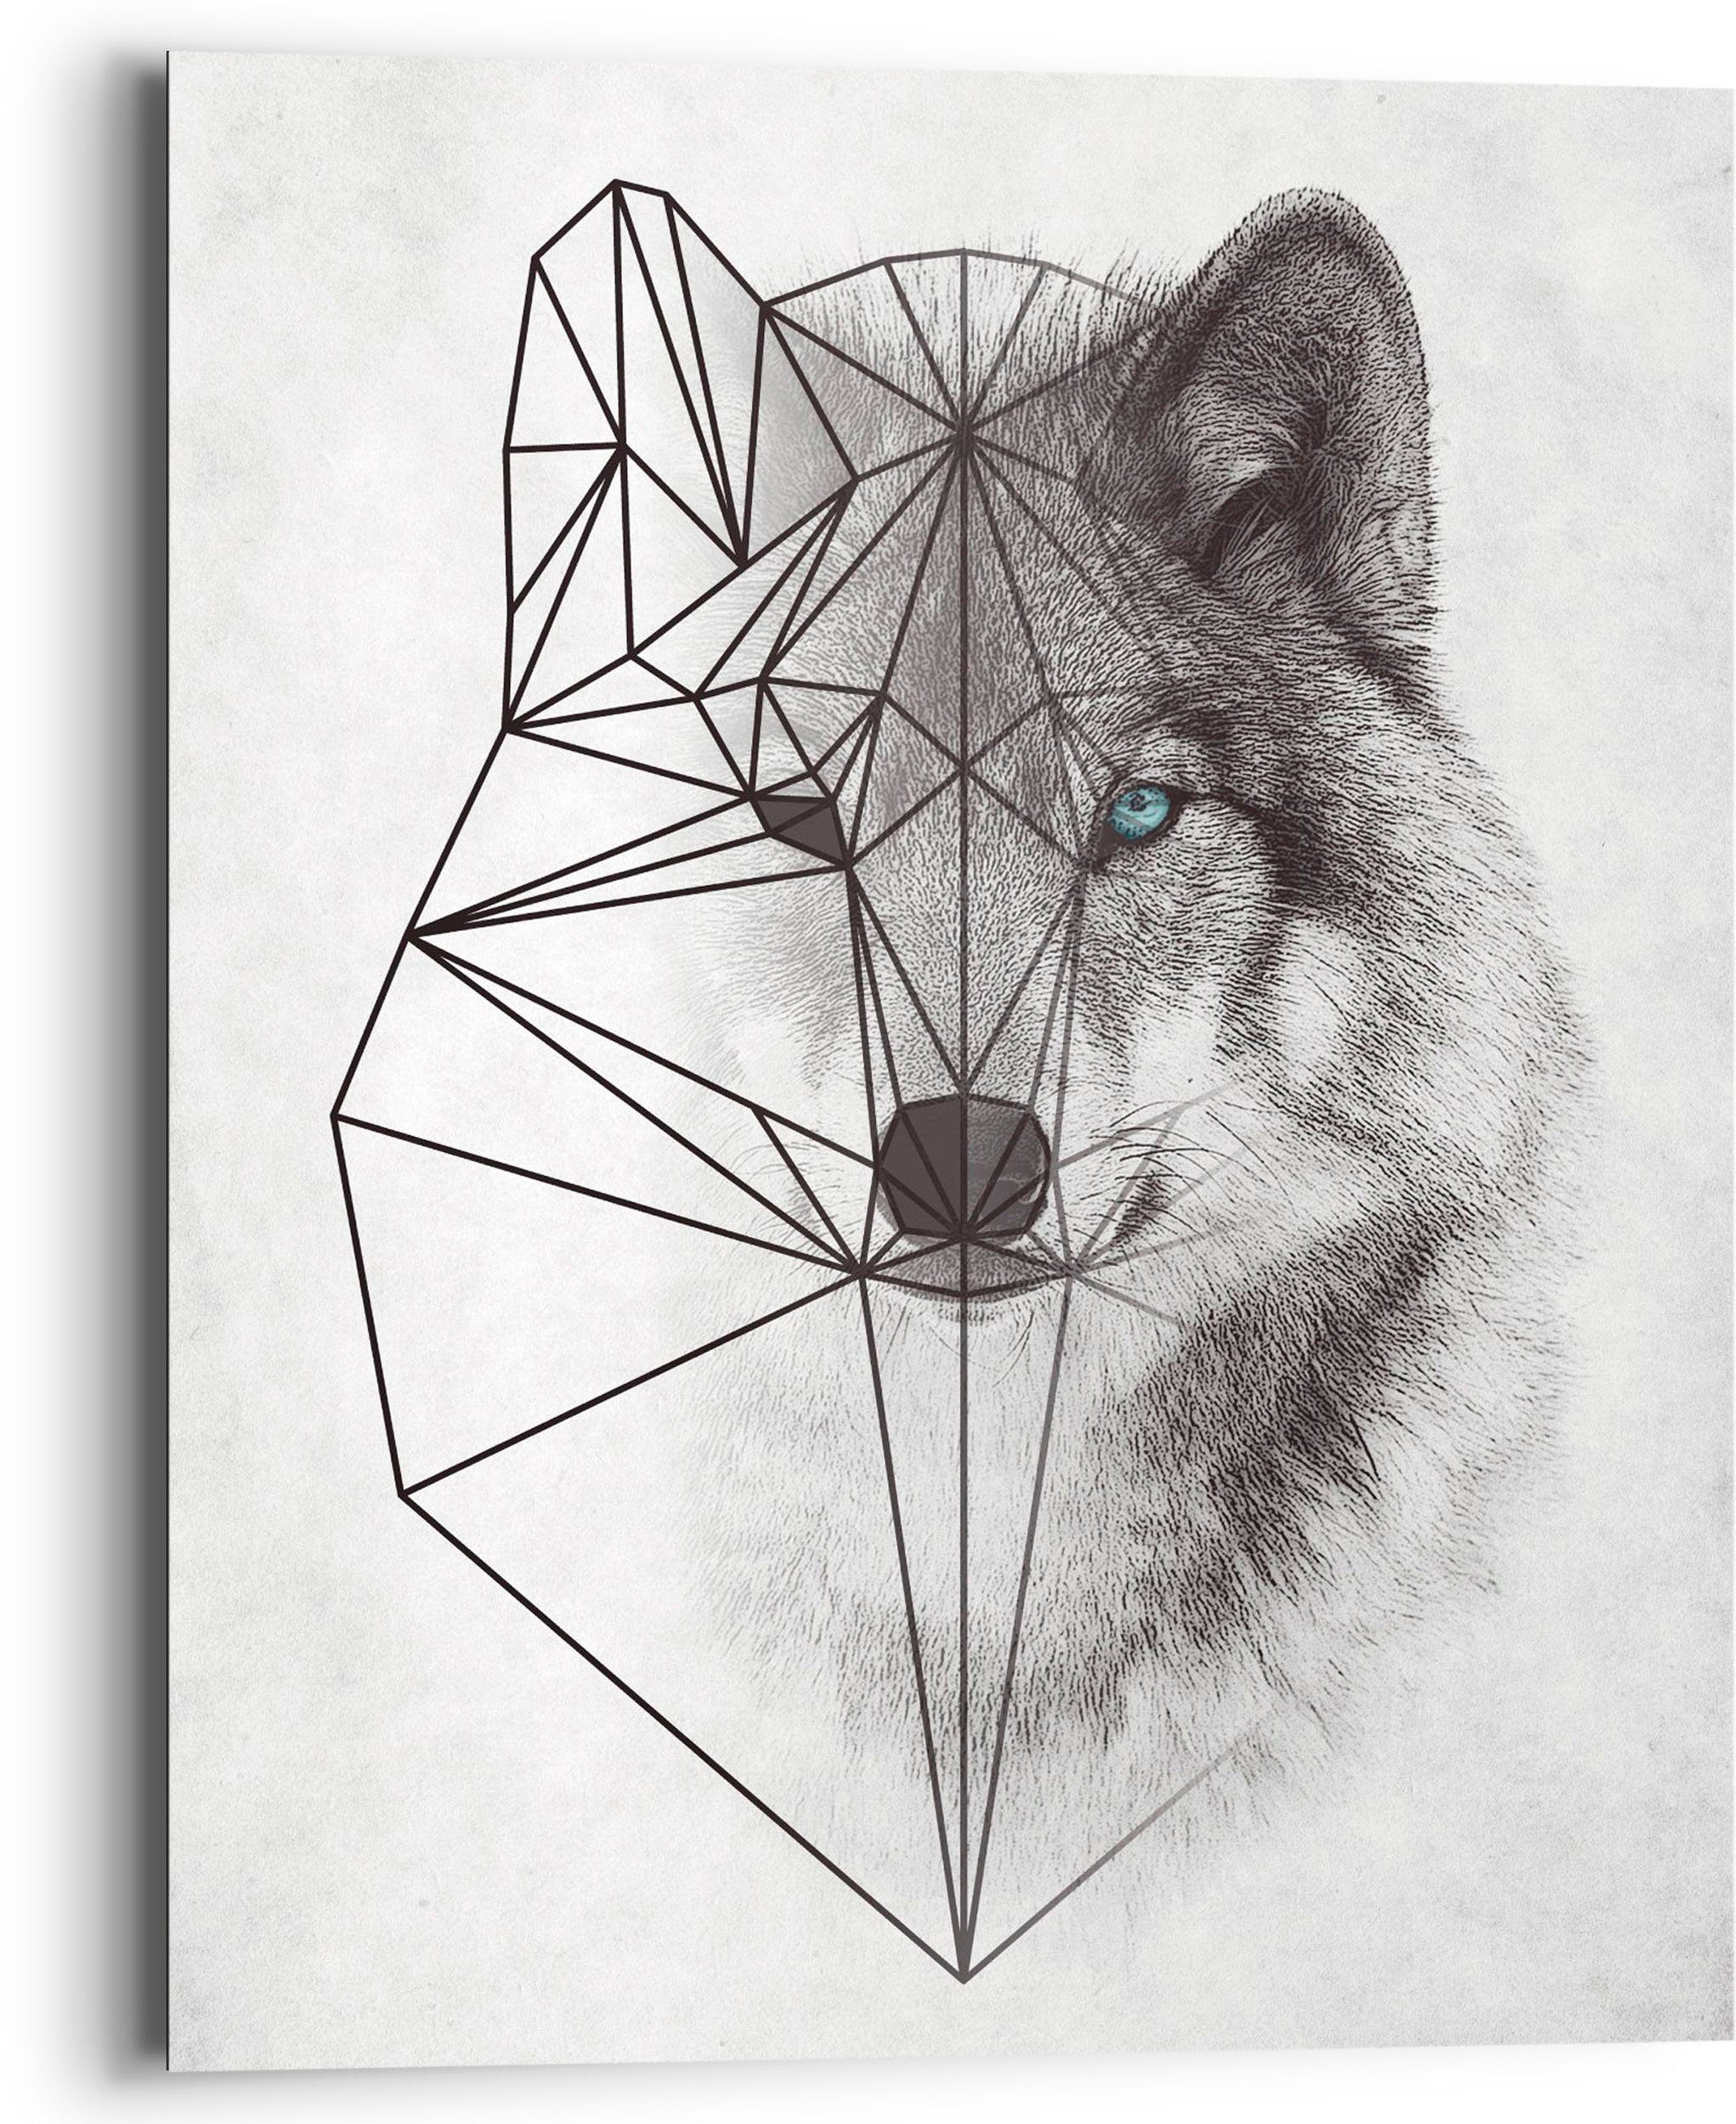 Reinders! Holzbild Polygonic St) Wolf, (1